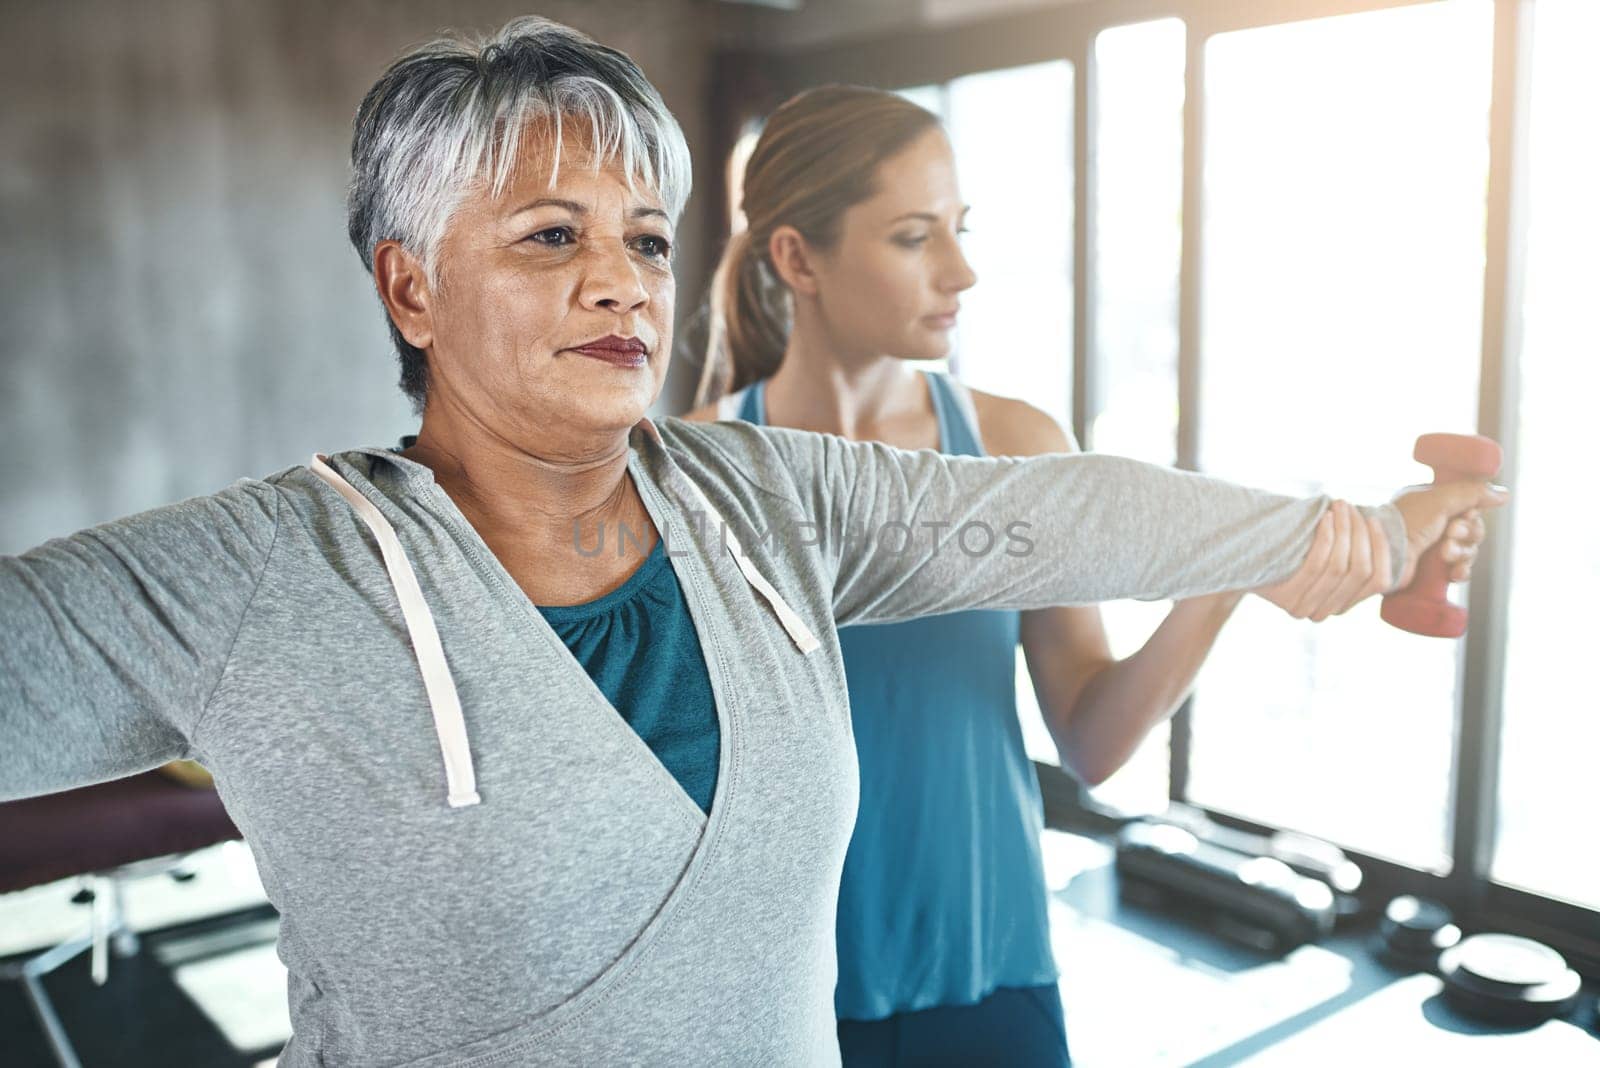 Dumbbell, physiotherapy and old woman with personal trainer for fitness, wellness or rehabilitation. Health, workout or retirement with senior patient and physiotherapist in gym for support training.